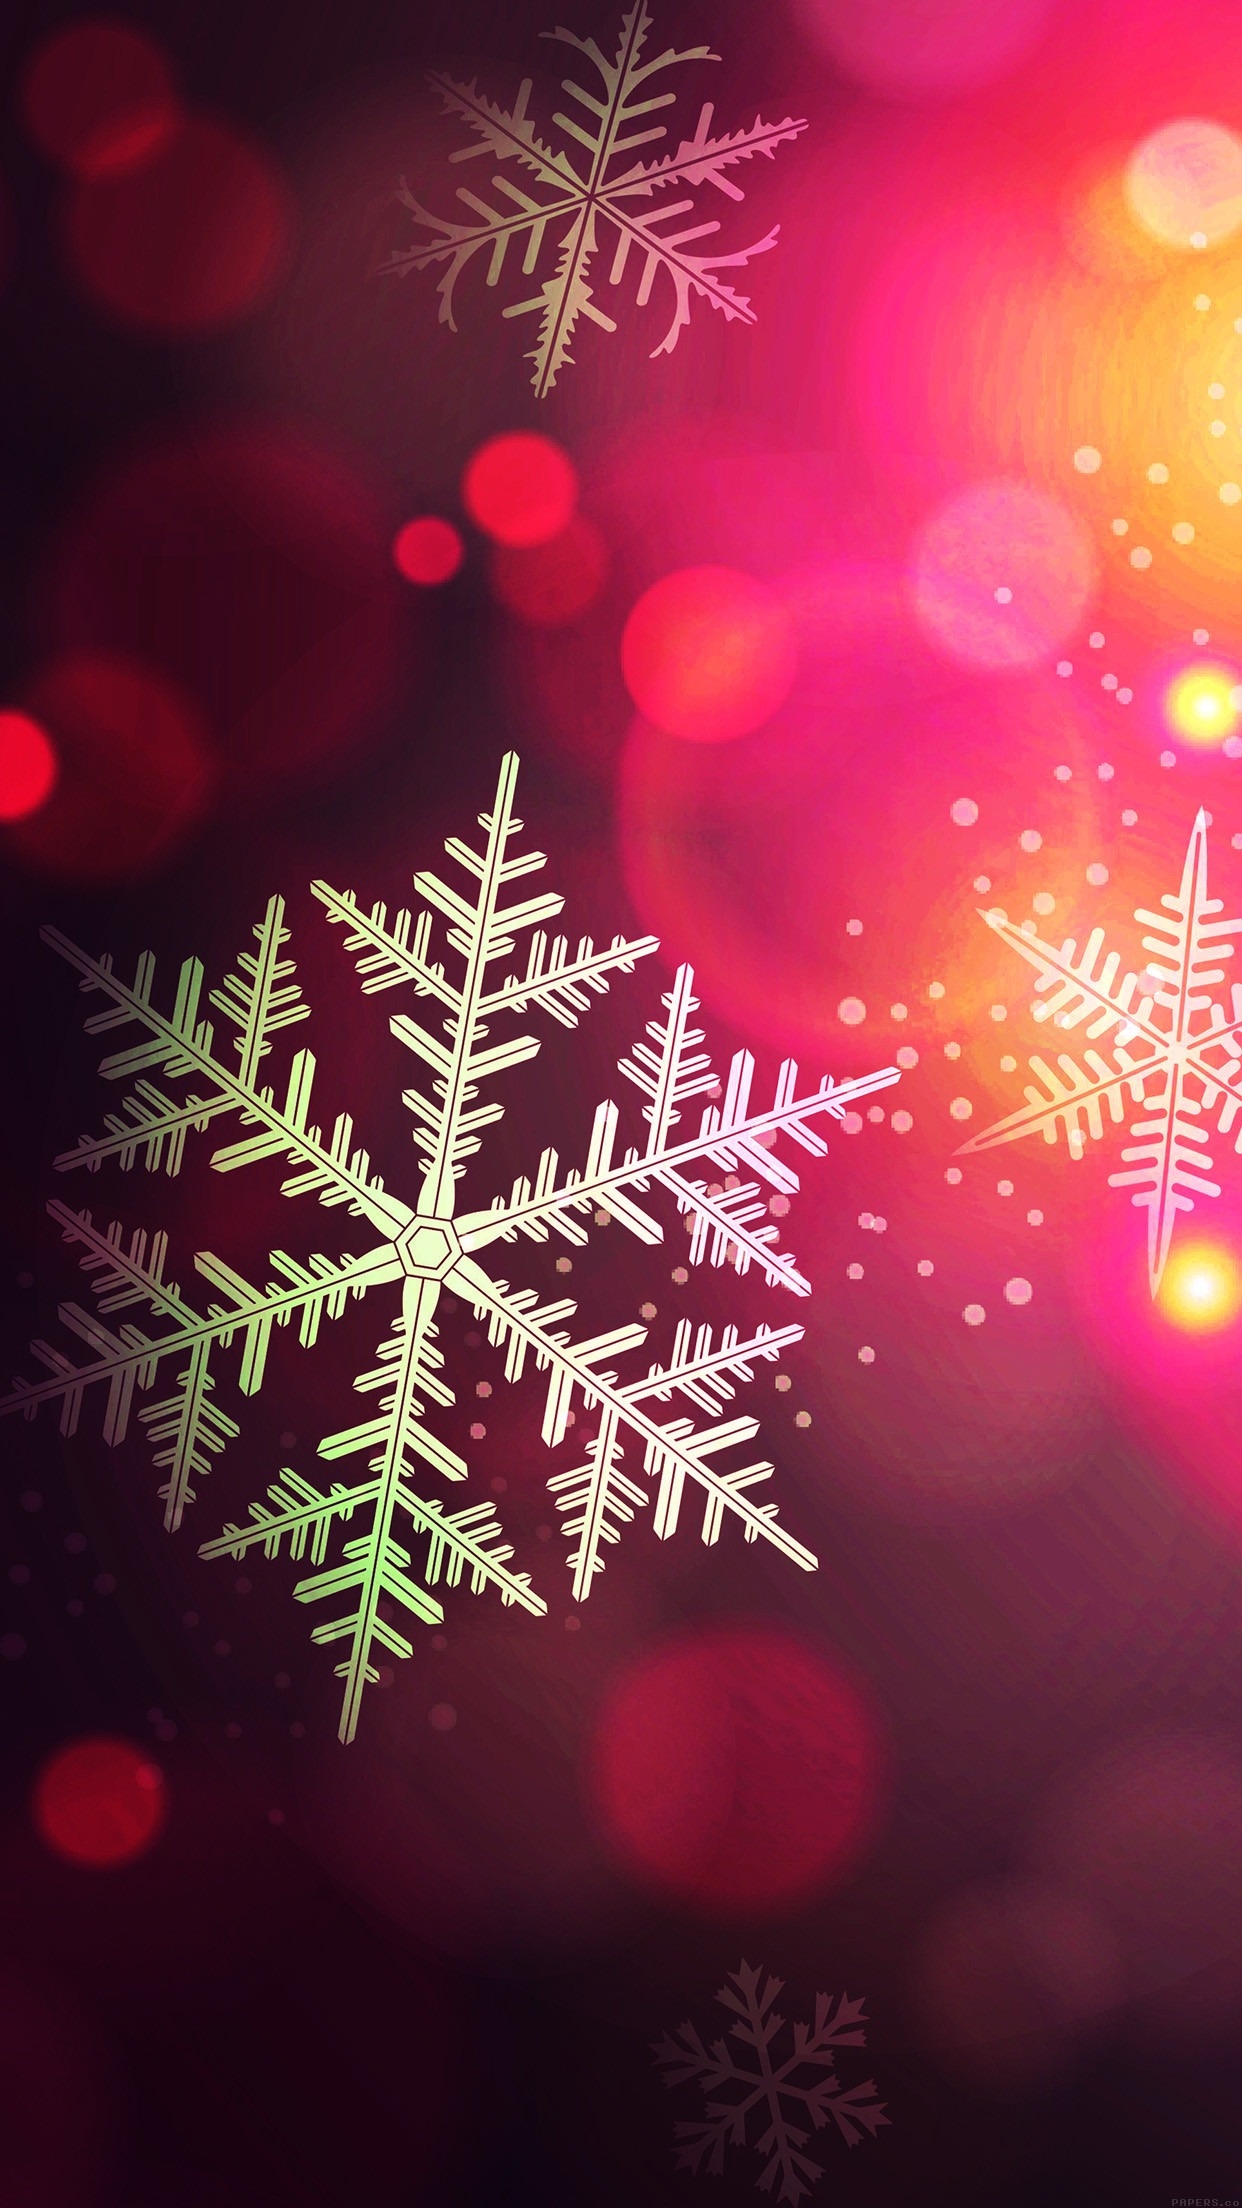 Christmas Wallpaper For Phones Throughout Christmas - Christmas Wallpaper  For Iphone 7 Plus - 1242x2208 Wallpaper 